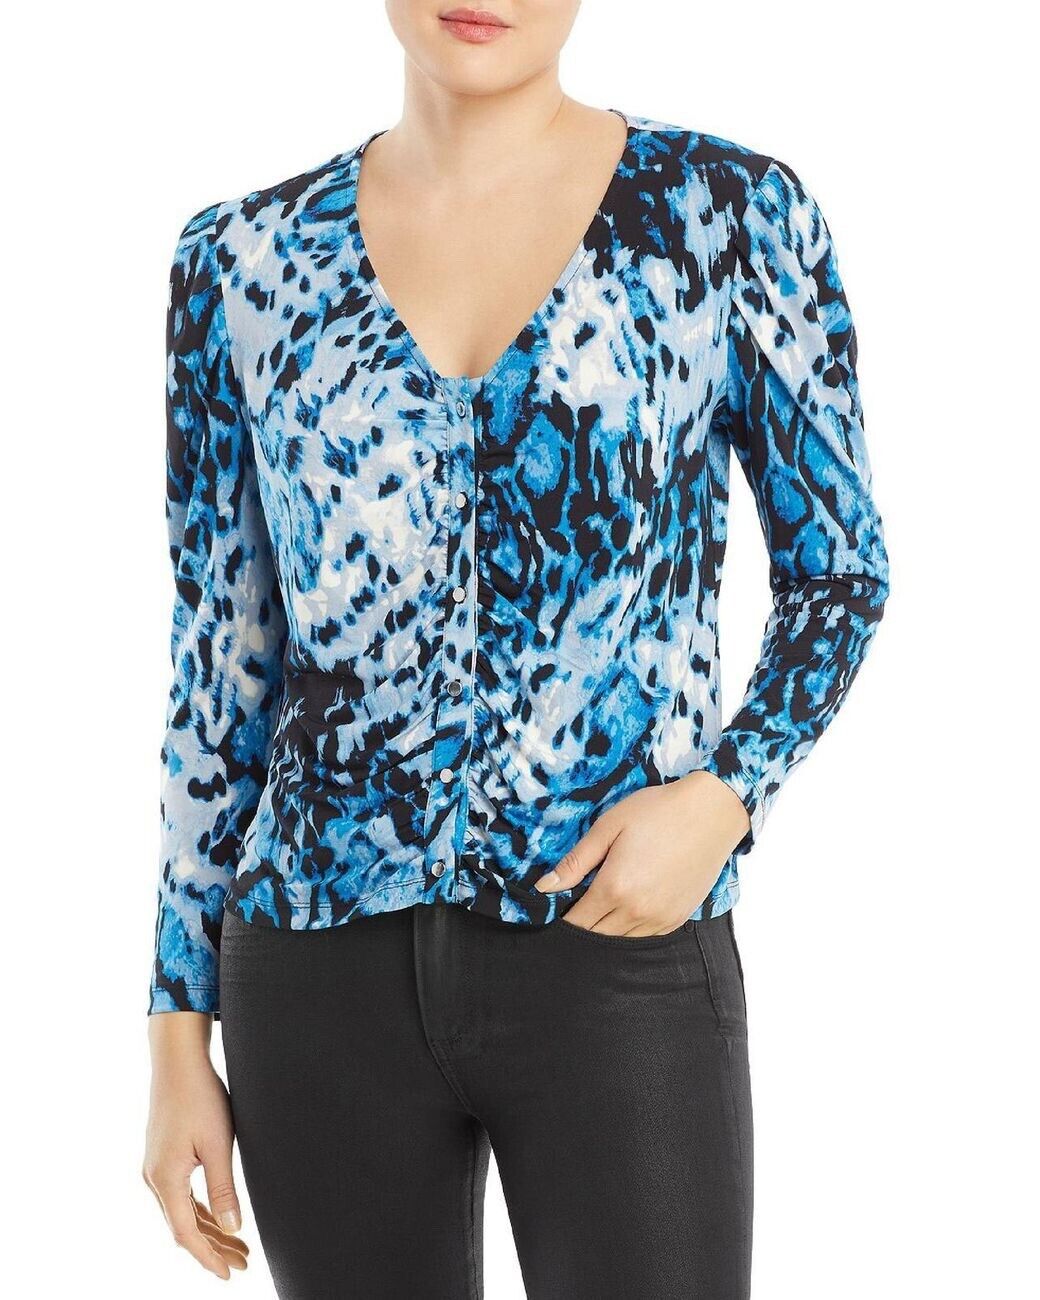 SINGLE THREAD Womens Ruched Printed Blouse XS